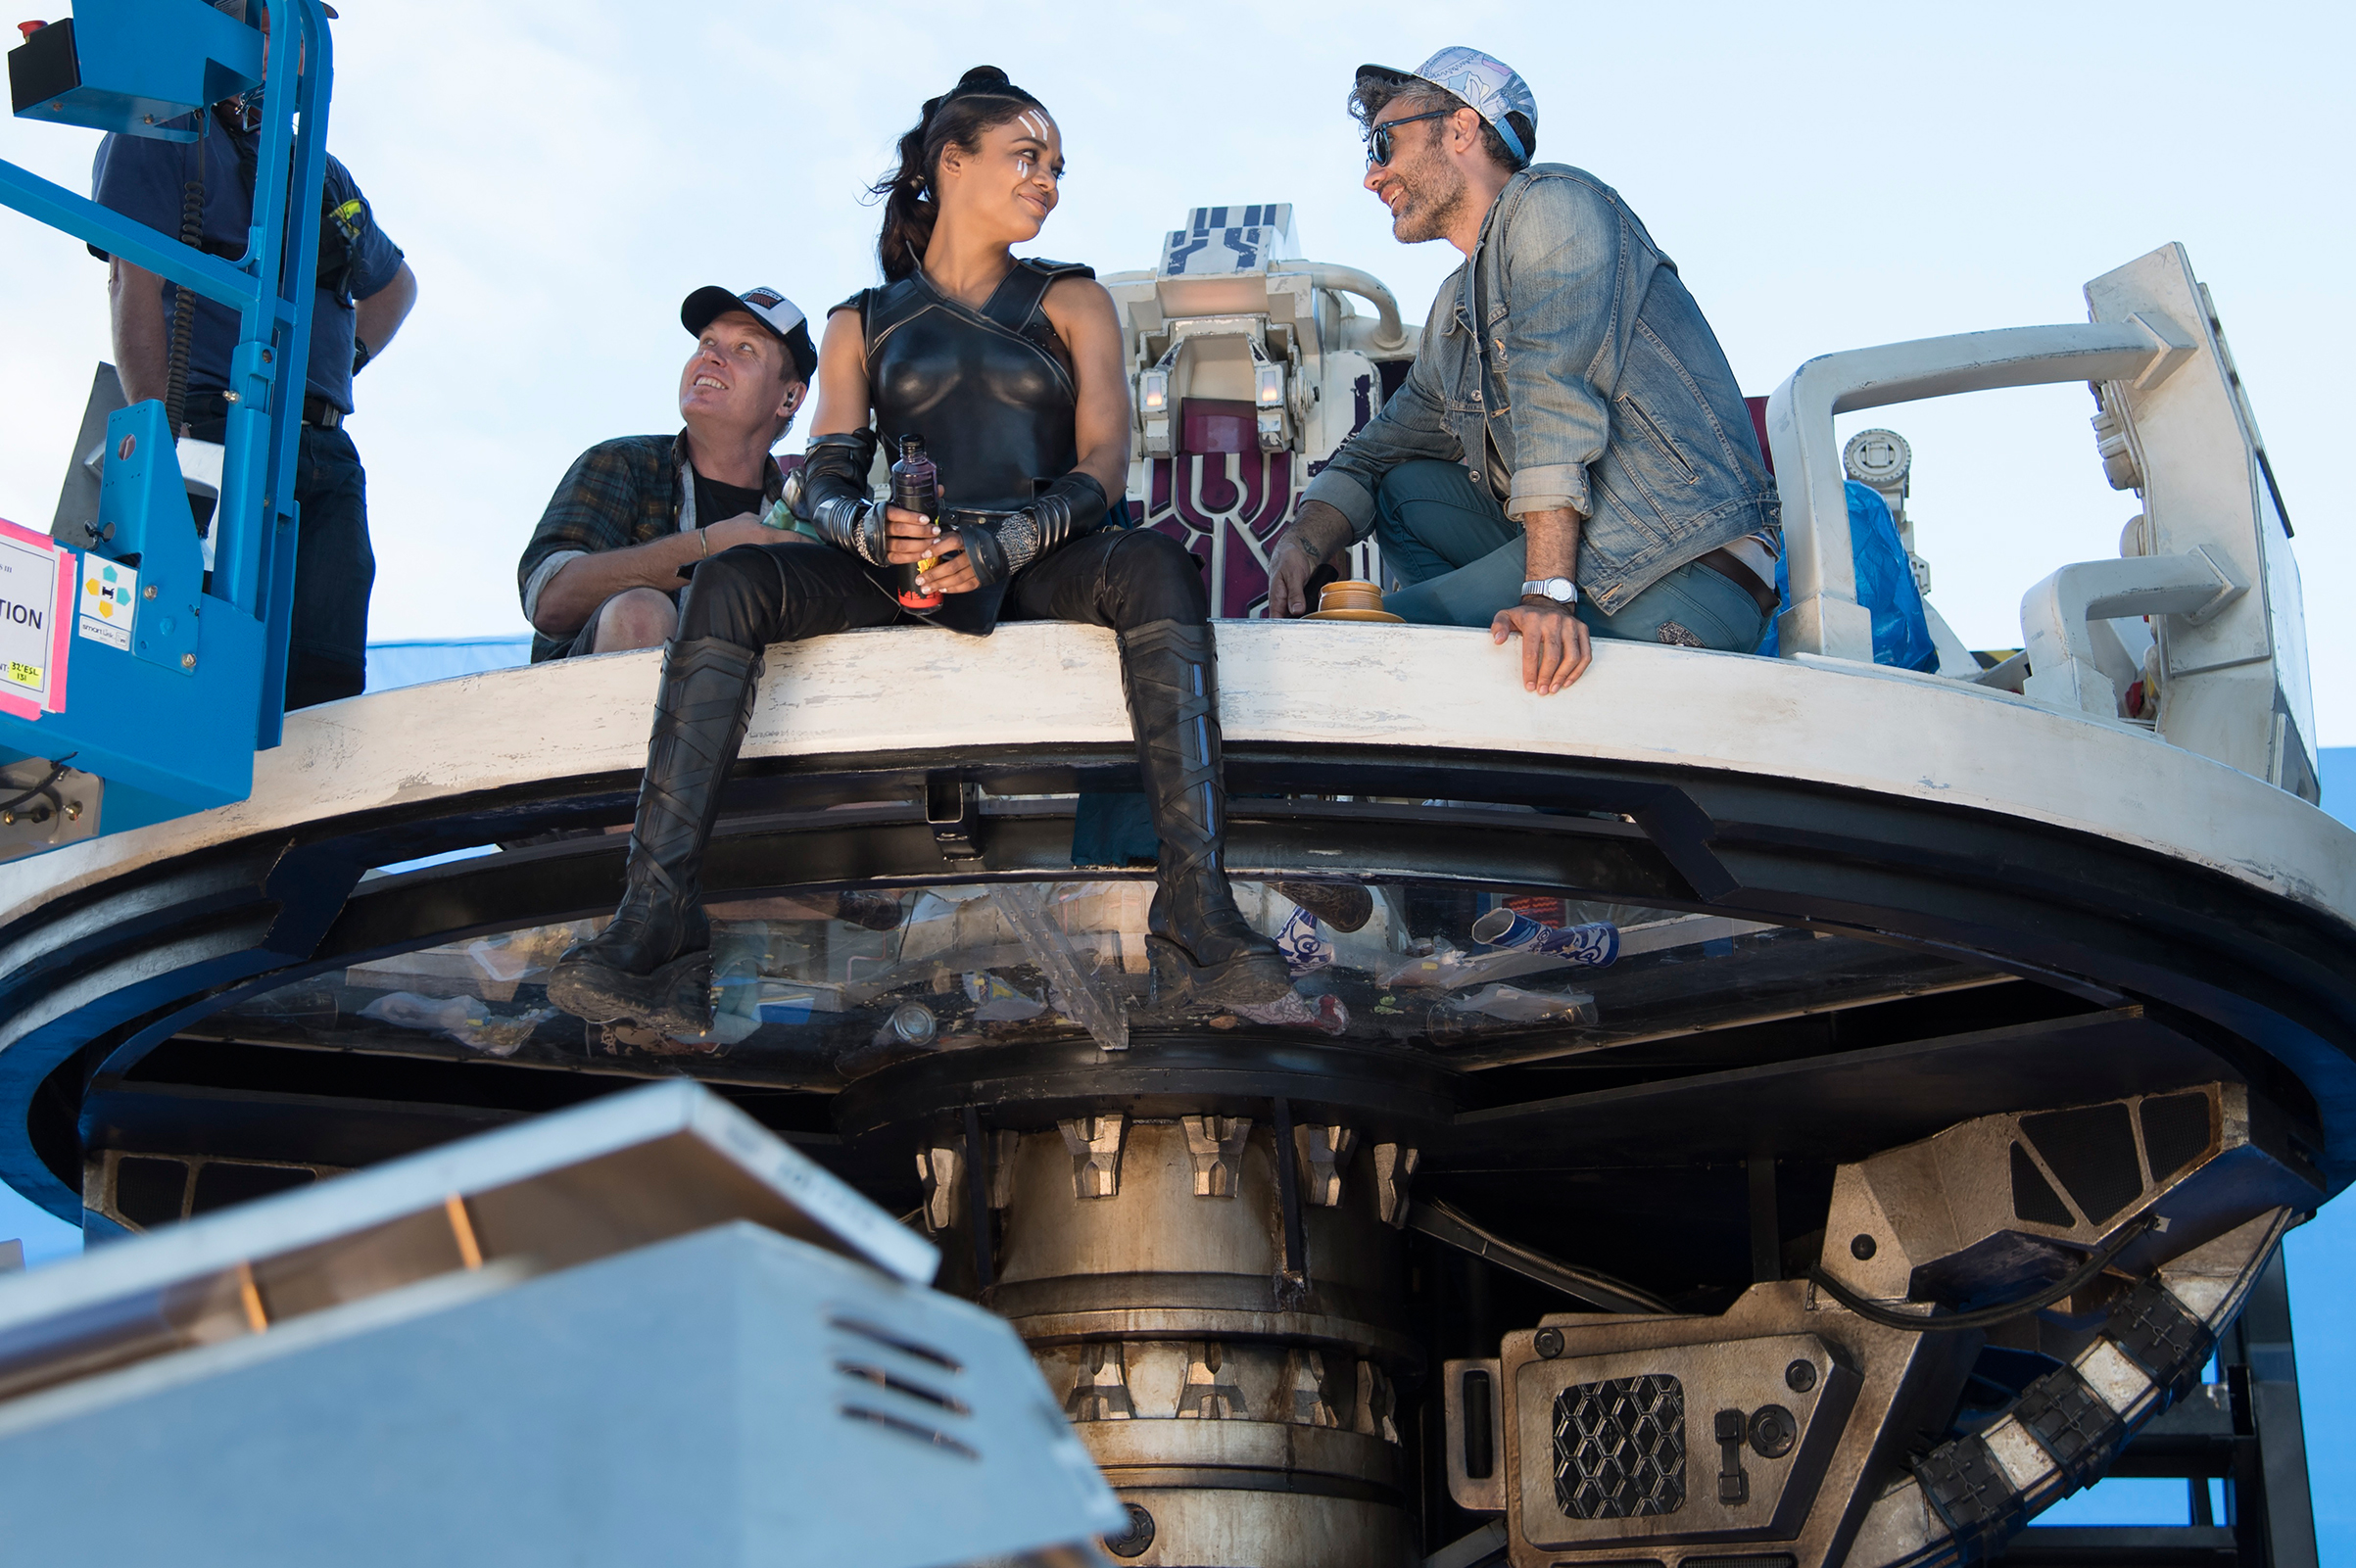 Waititi coaxed stars like Cate Blanchett, Jeff Goldblum and Tessa Thompson (above) to flex their comedic muscles on the set of Thor in Australia. (Jasin Boland—Marvel Studios)